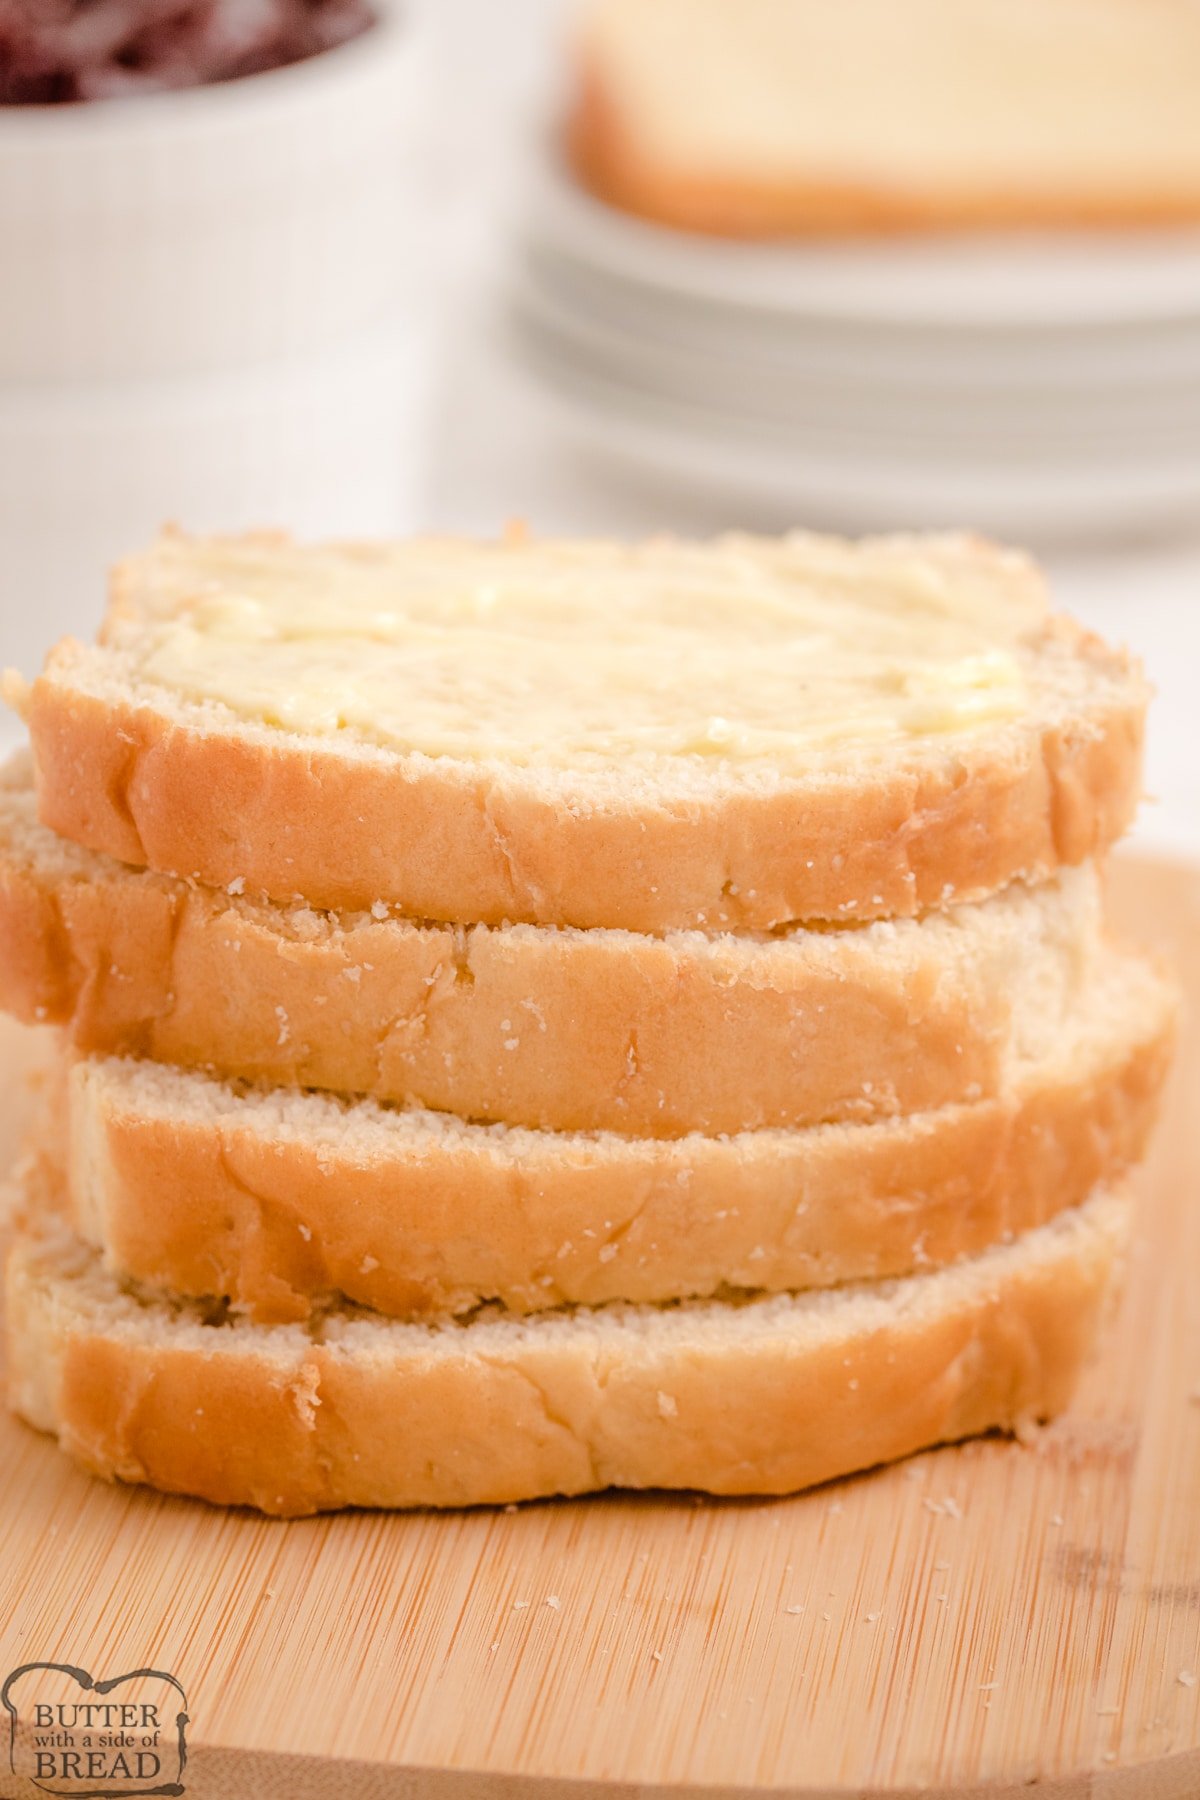 Diy Bread Slicing Guide: How To Cut Really Soft Bread?: Bread